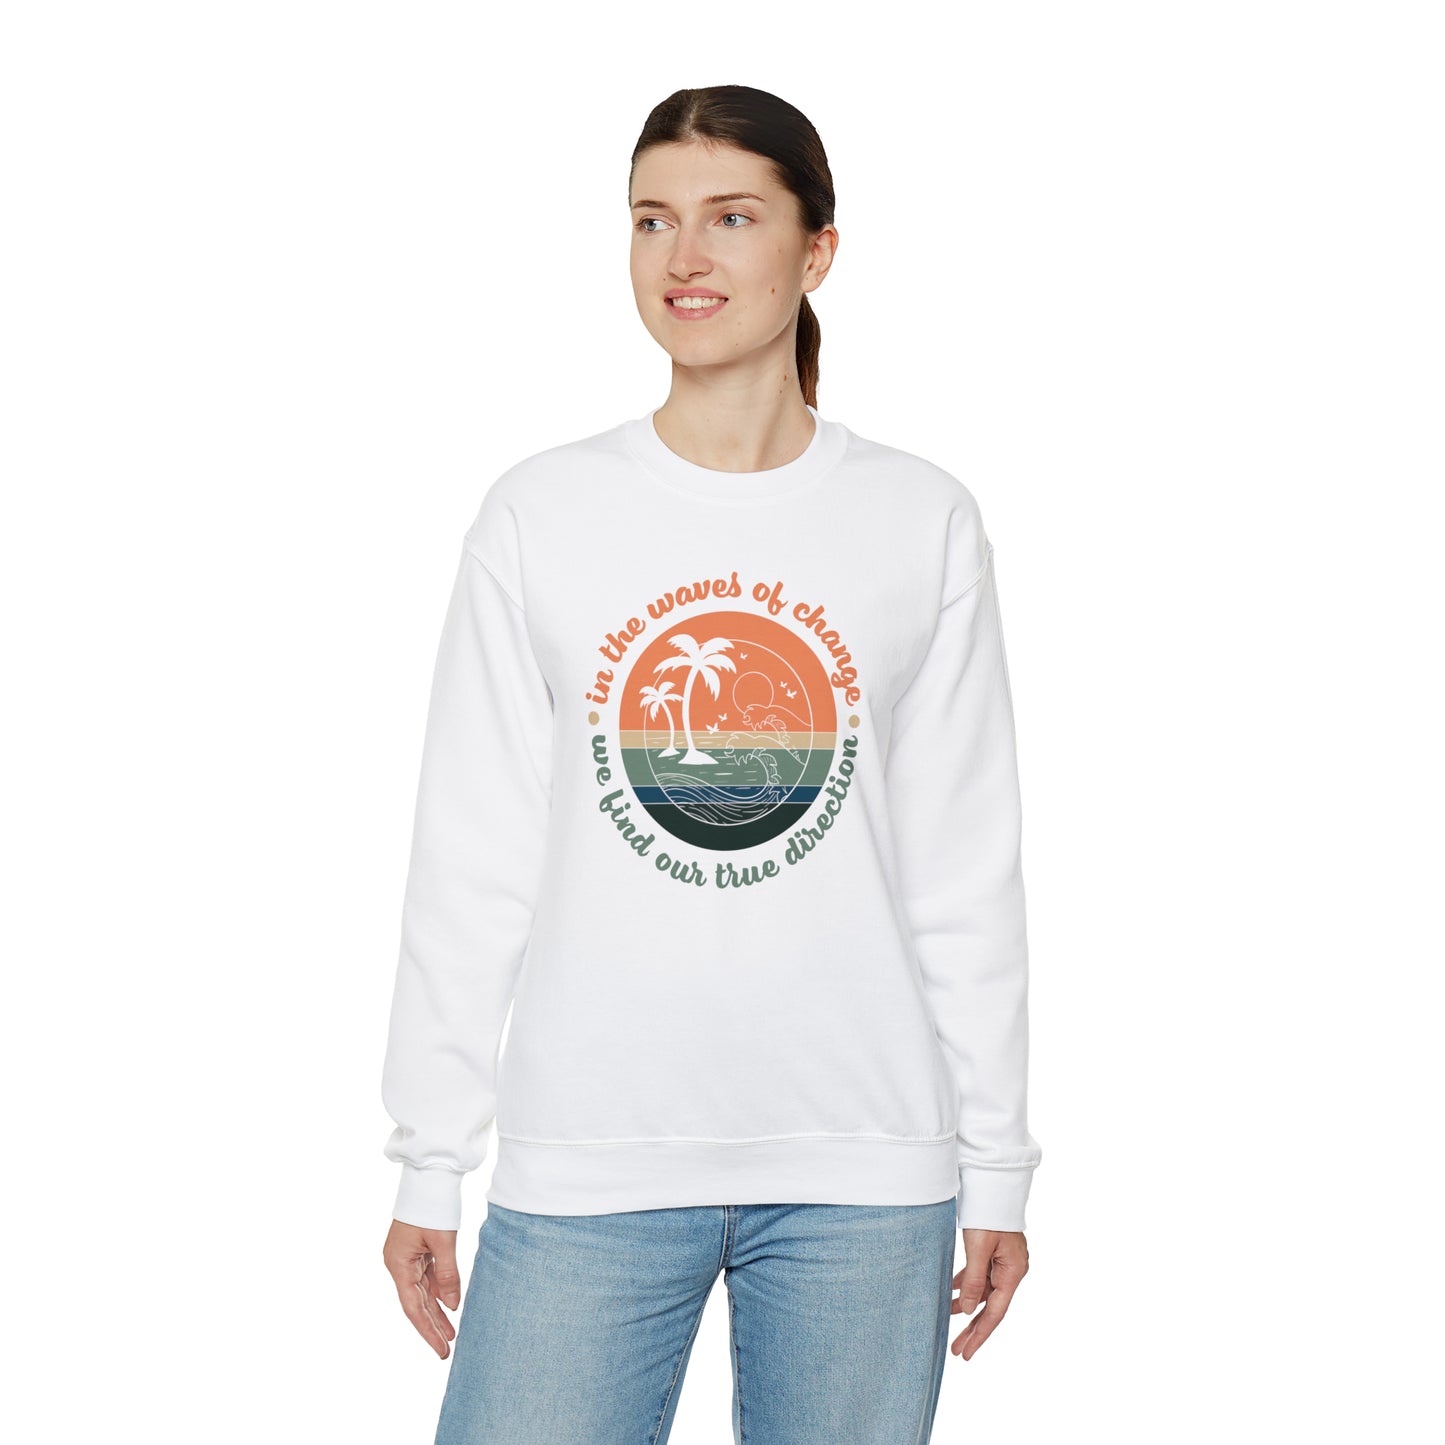 In the Waves of Change We Find Our True Direction Crewneck Sweatshirt